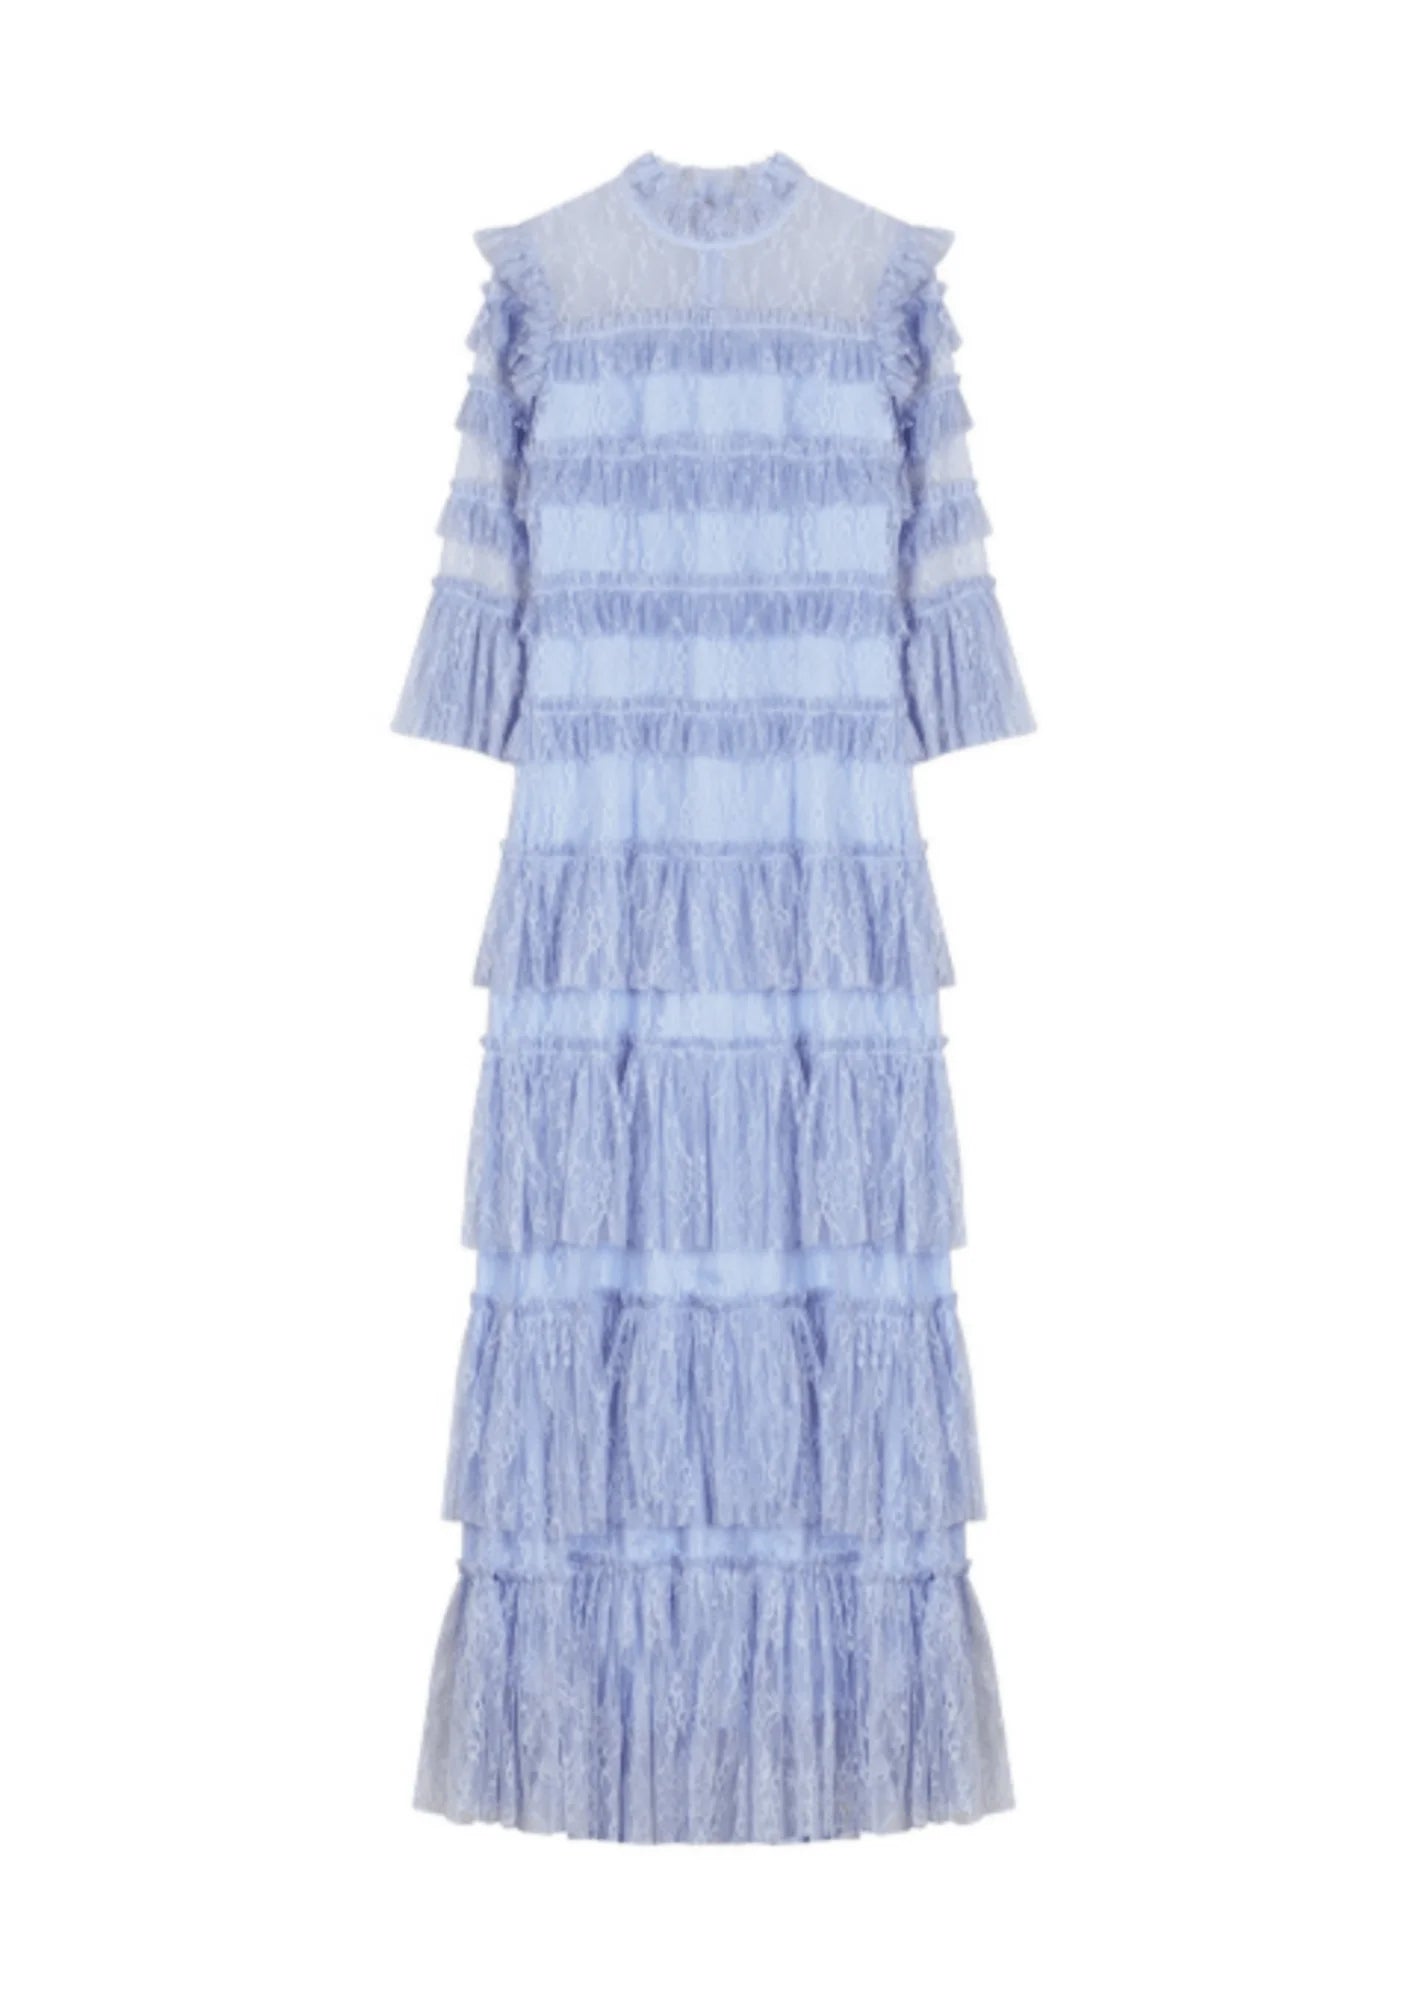 LAVENDER BLUE LONG DRESS LACE AND FRILLS